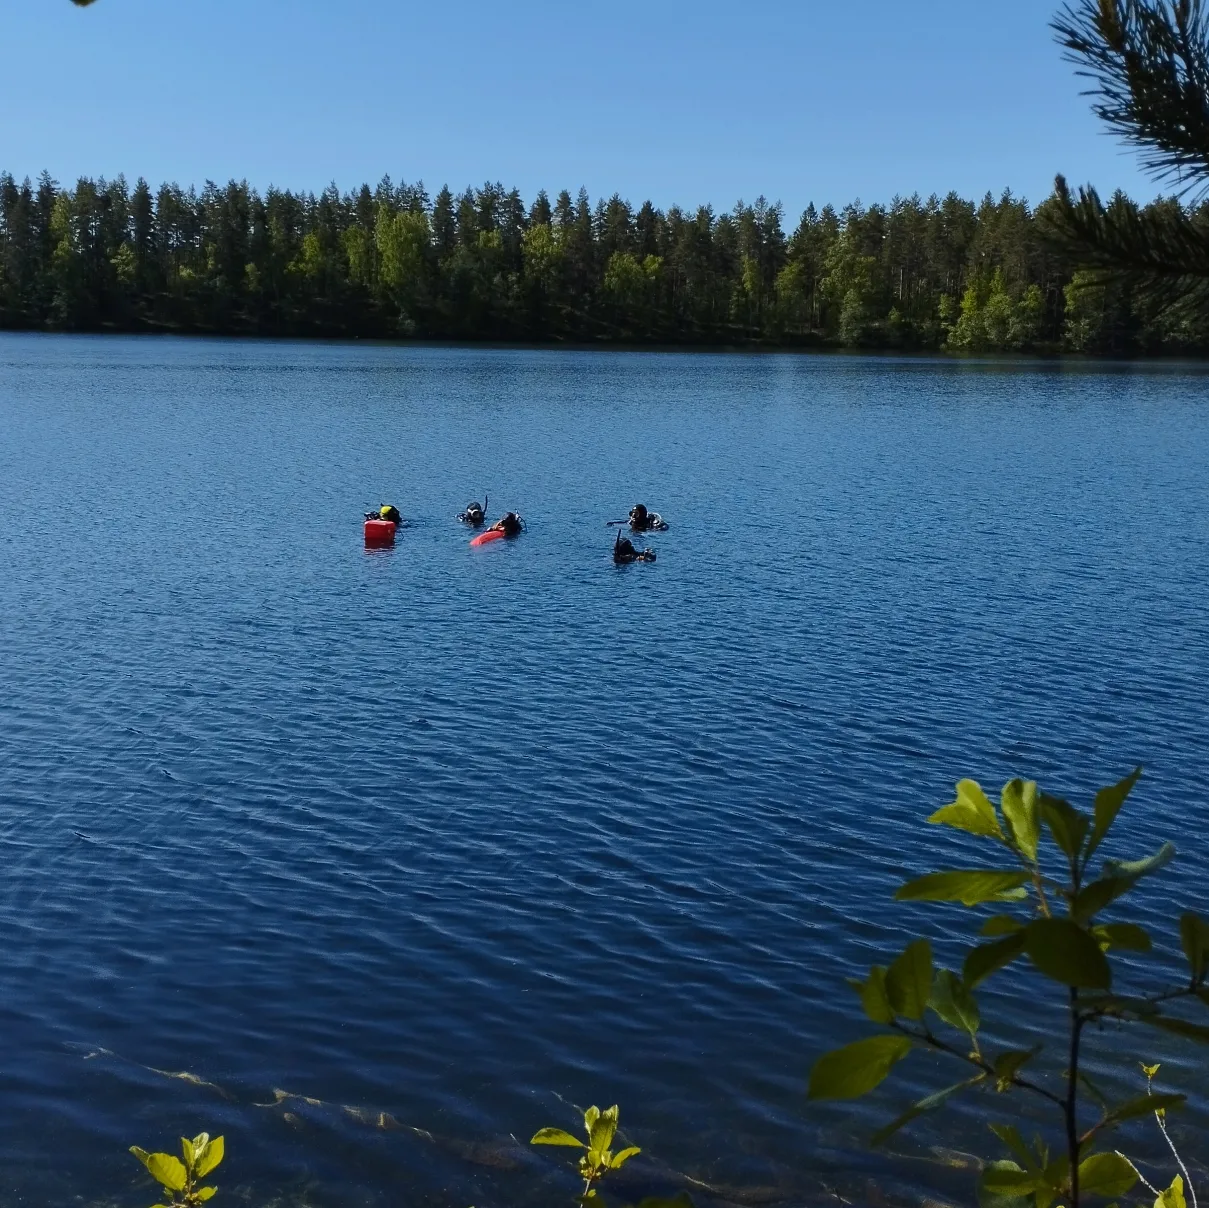 Four divers dive into a Finnish lake during the PADI Instructor Examination